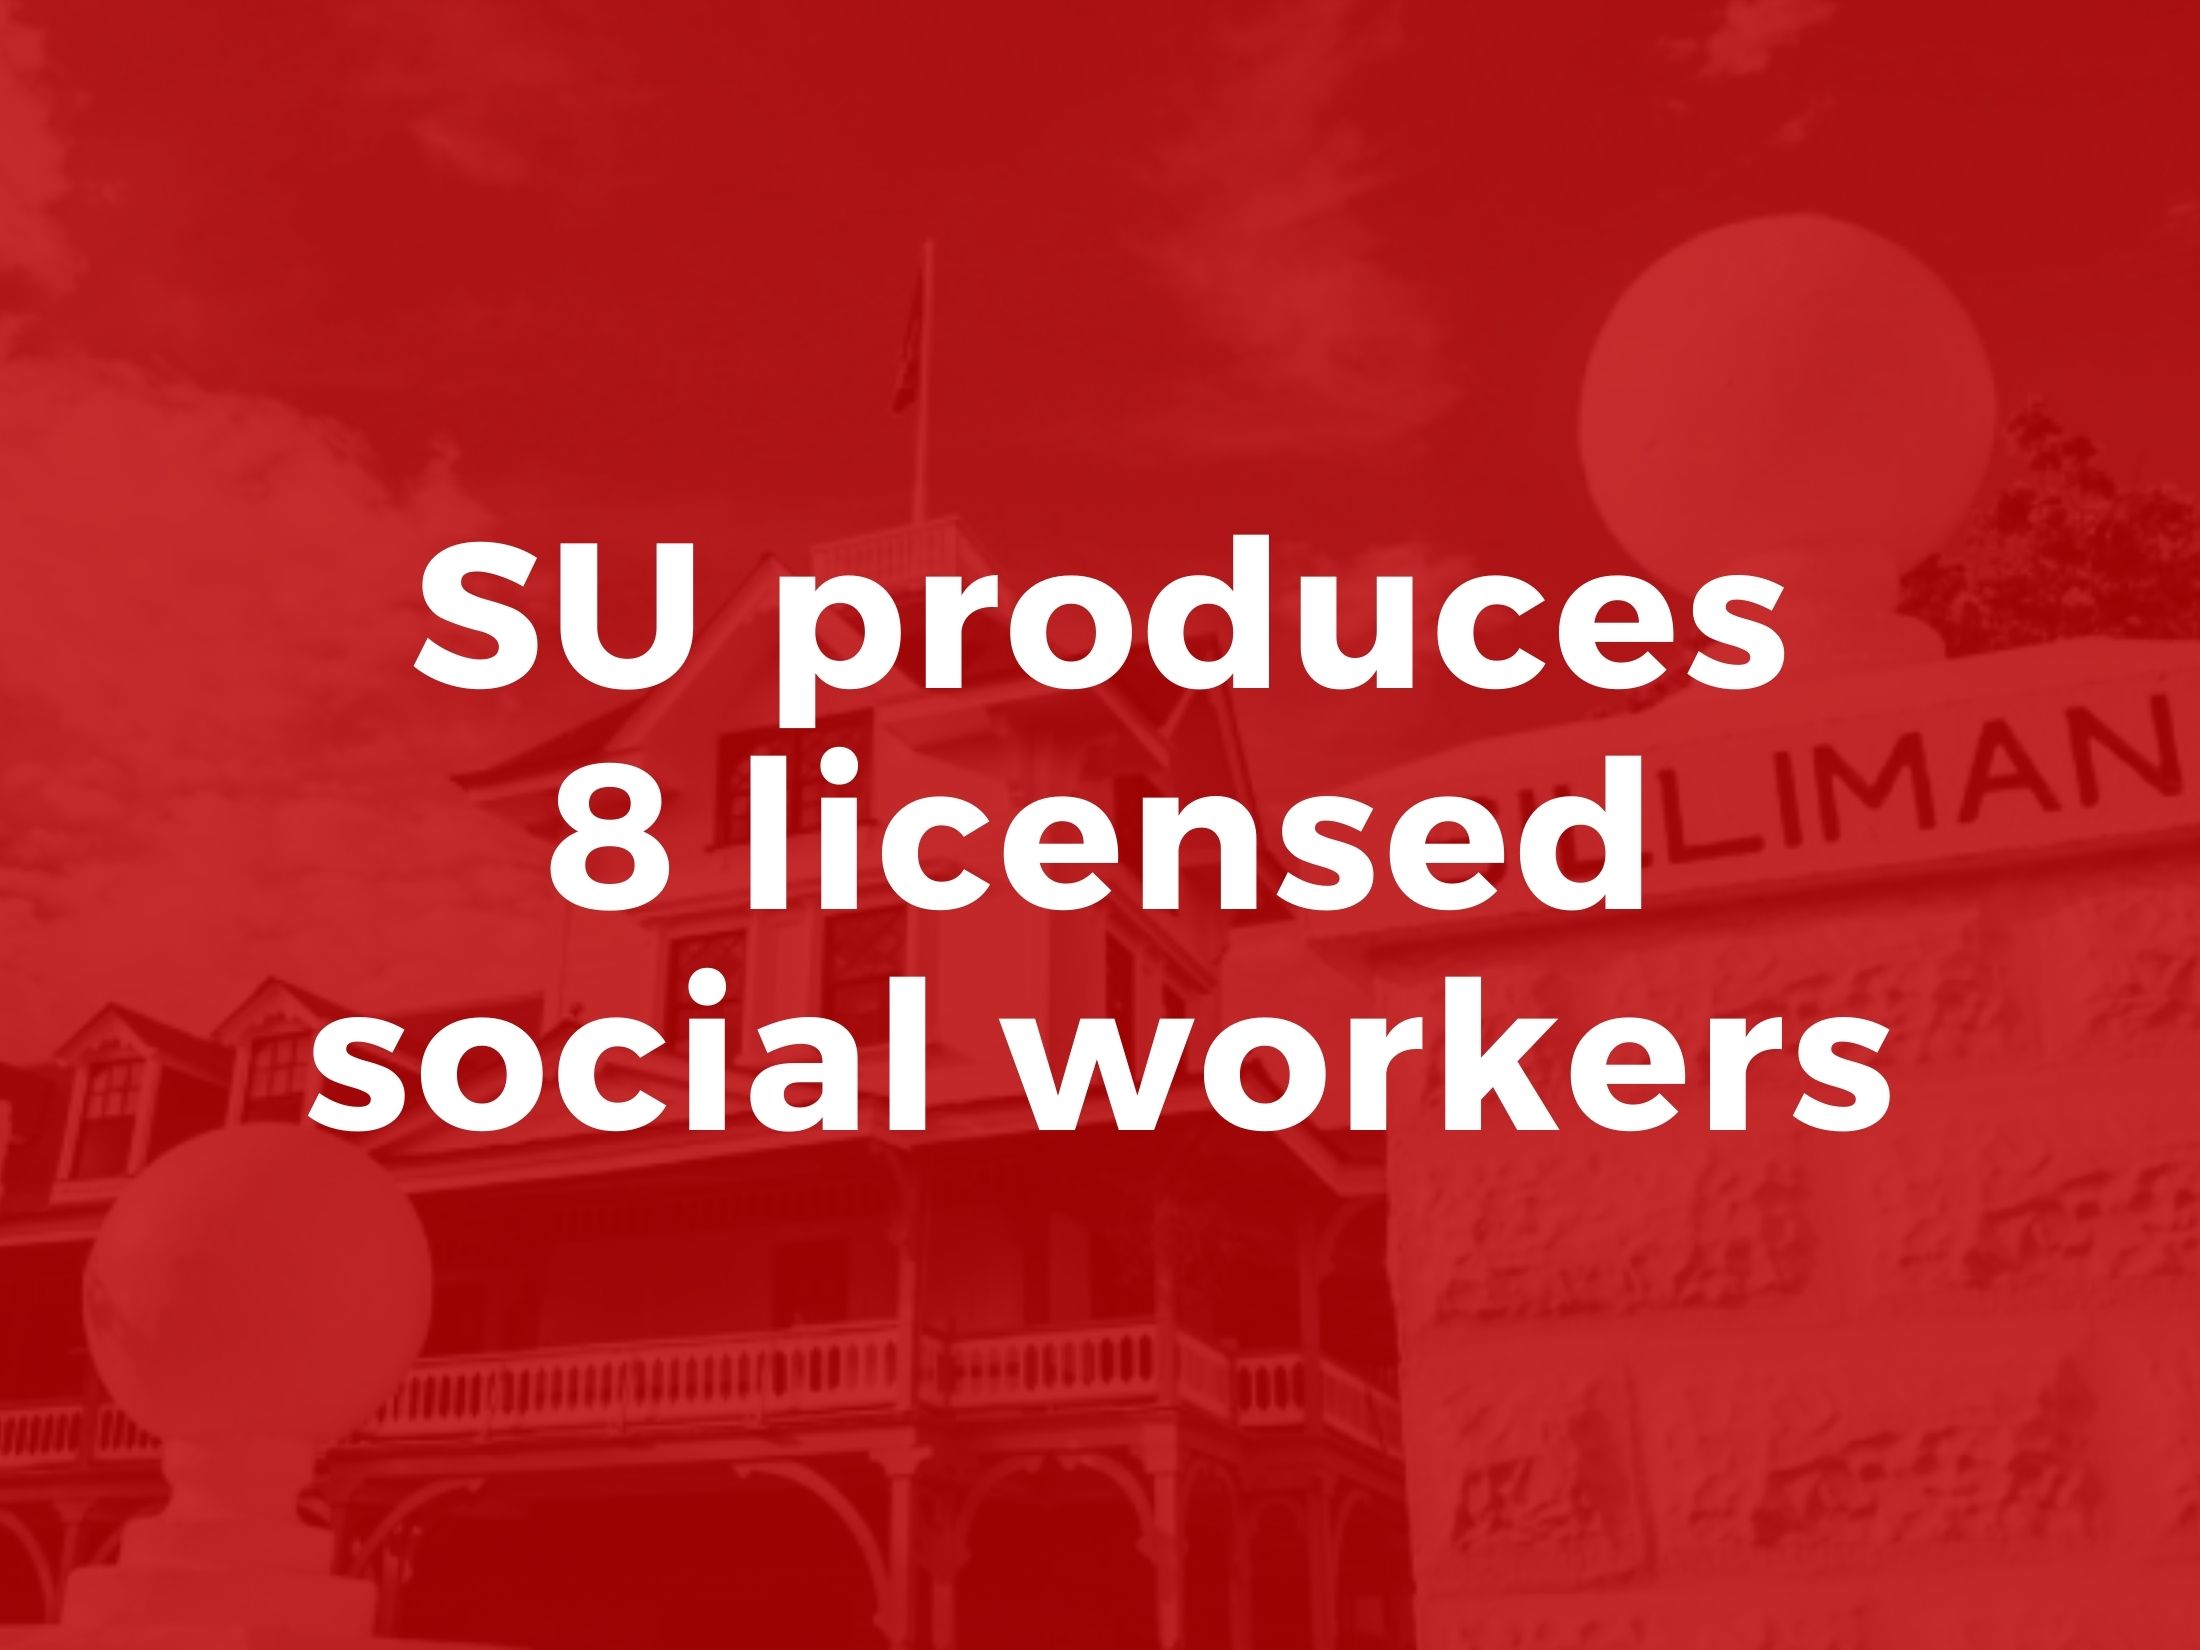 SU produces 8 licensed social workers